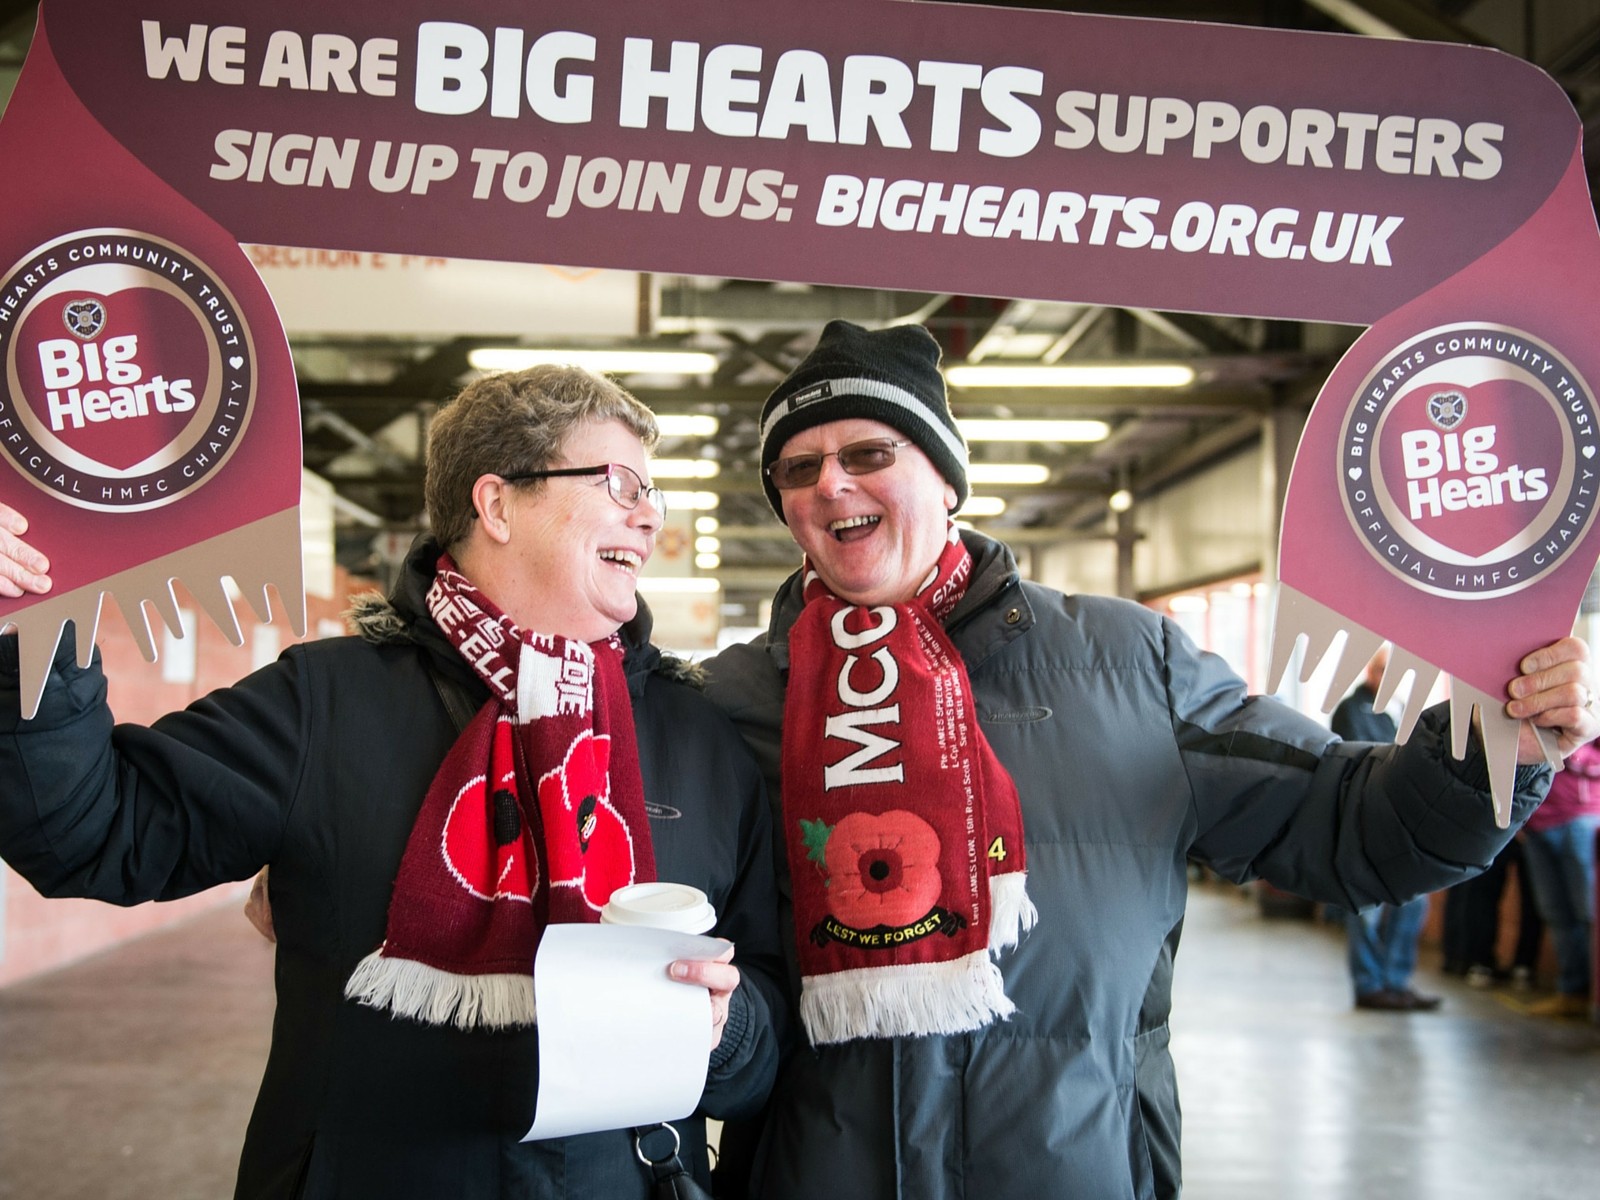  » We Are Big Hearts Supporters!